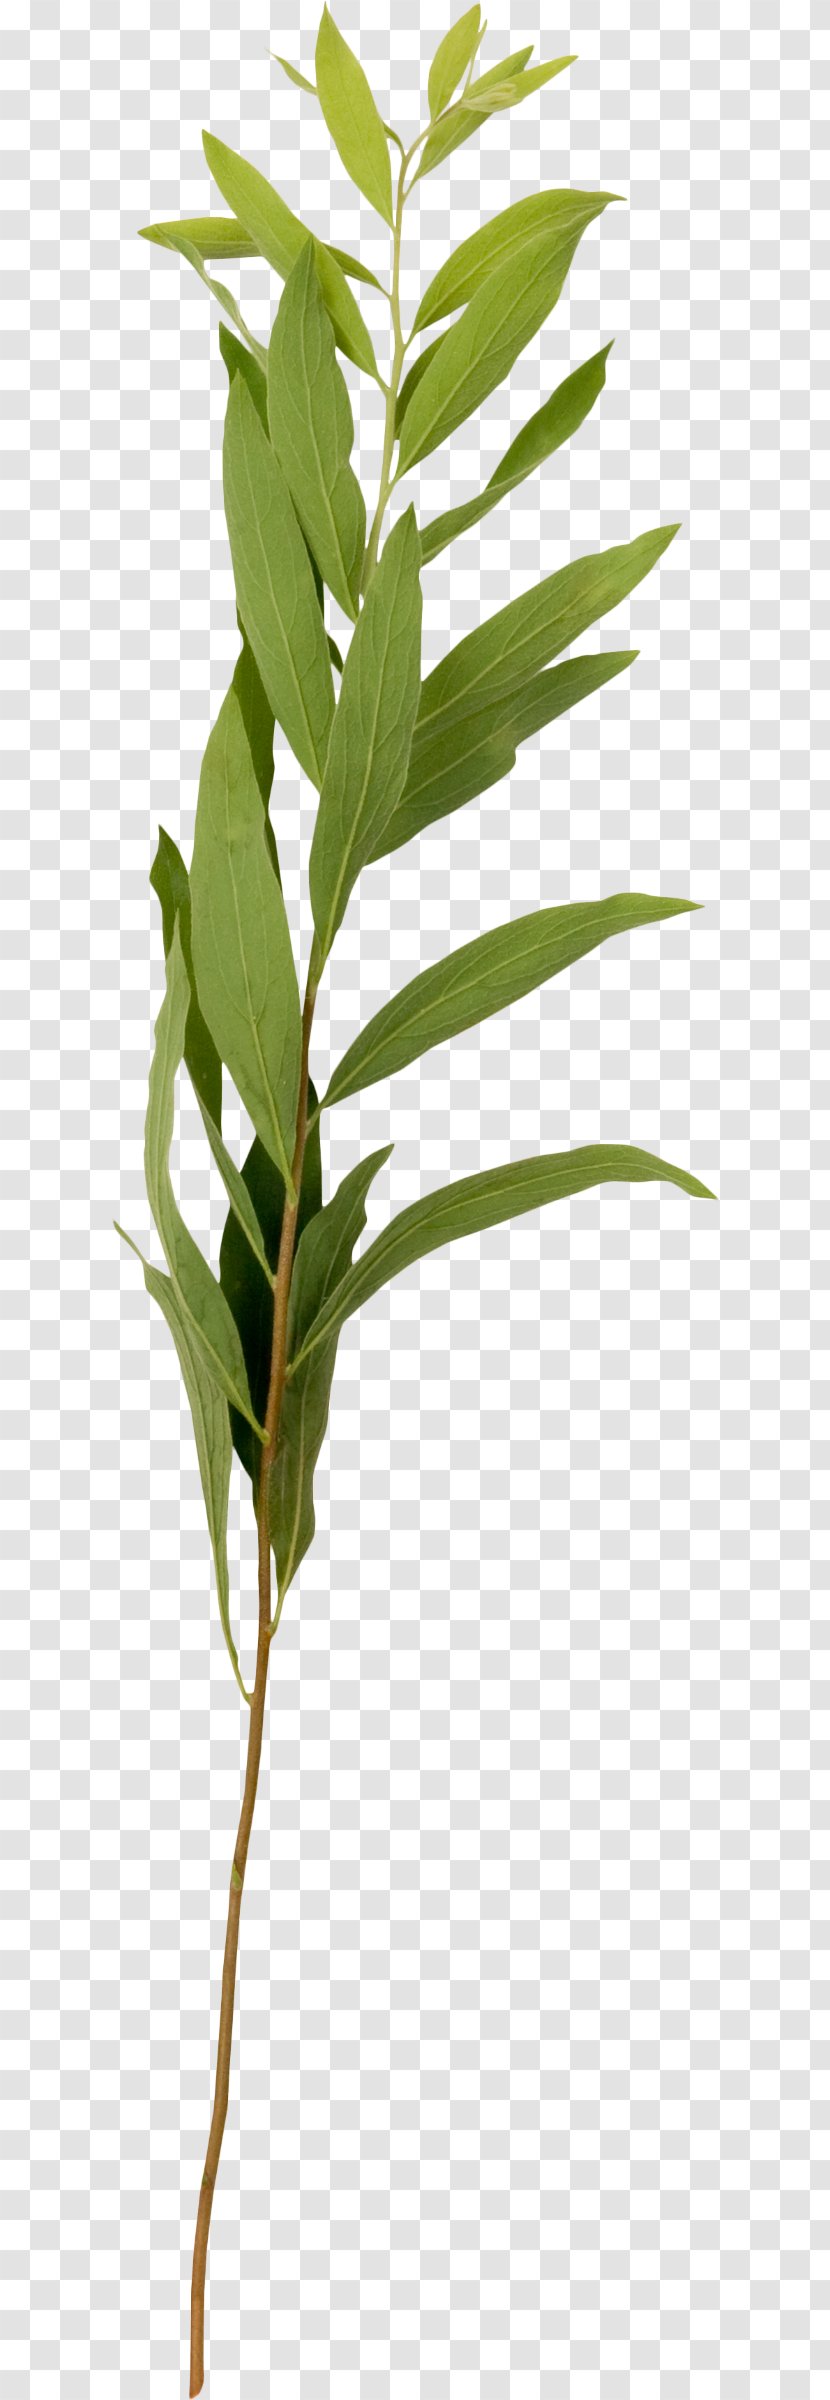 Photography Plant Collage Yandex Search - Greenery Transparent PNG